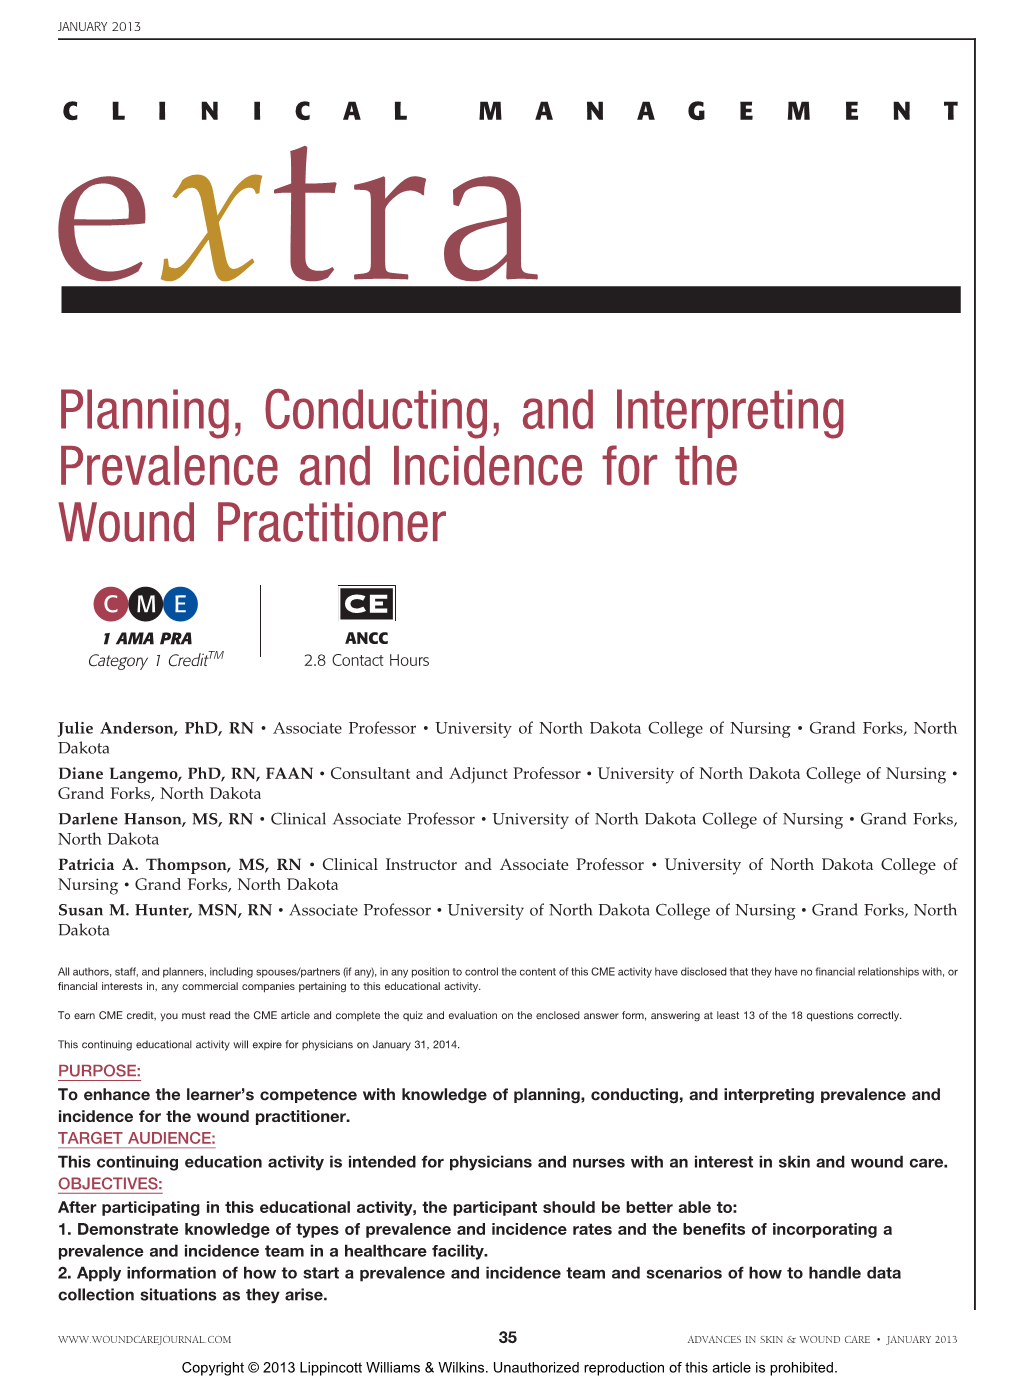 Planning, Conducting, and Interpreting Prevalence and Incidence for the Wound Practitioner